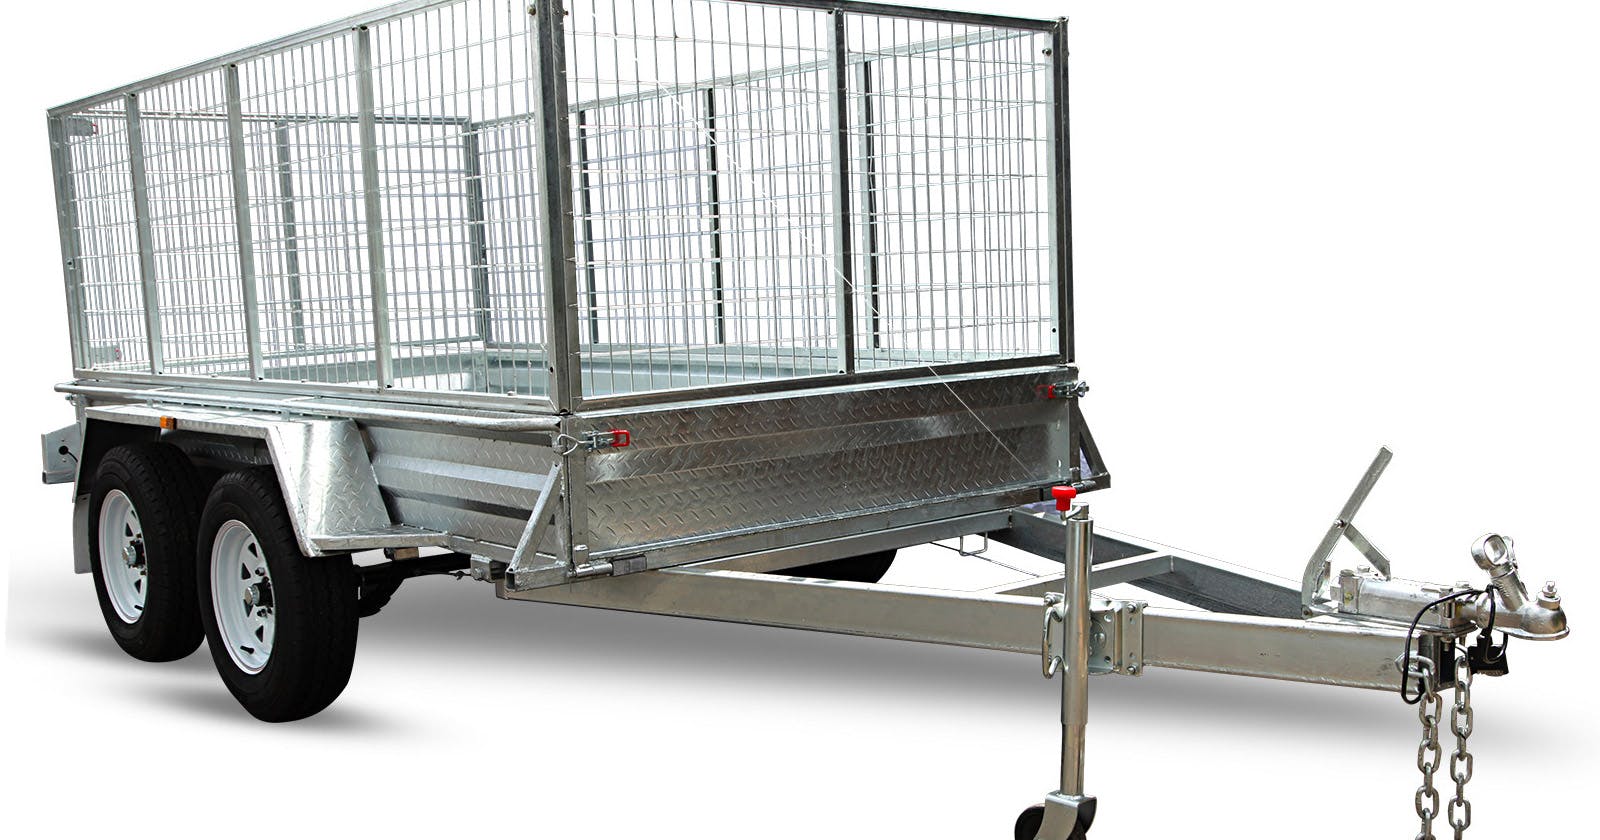 Get Your Hands on a High-Quality 6x4 Trailer for Sale at Xtreme Trailers